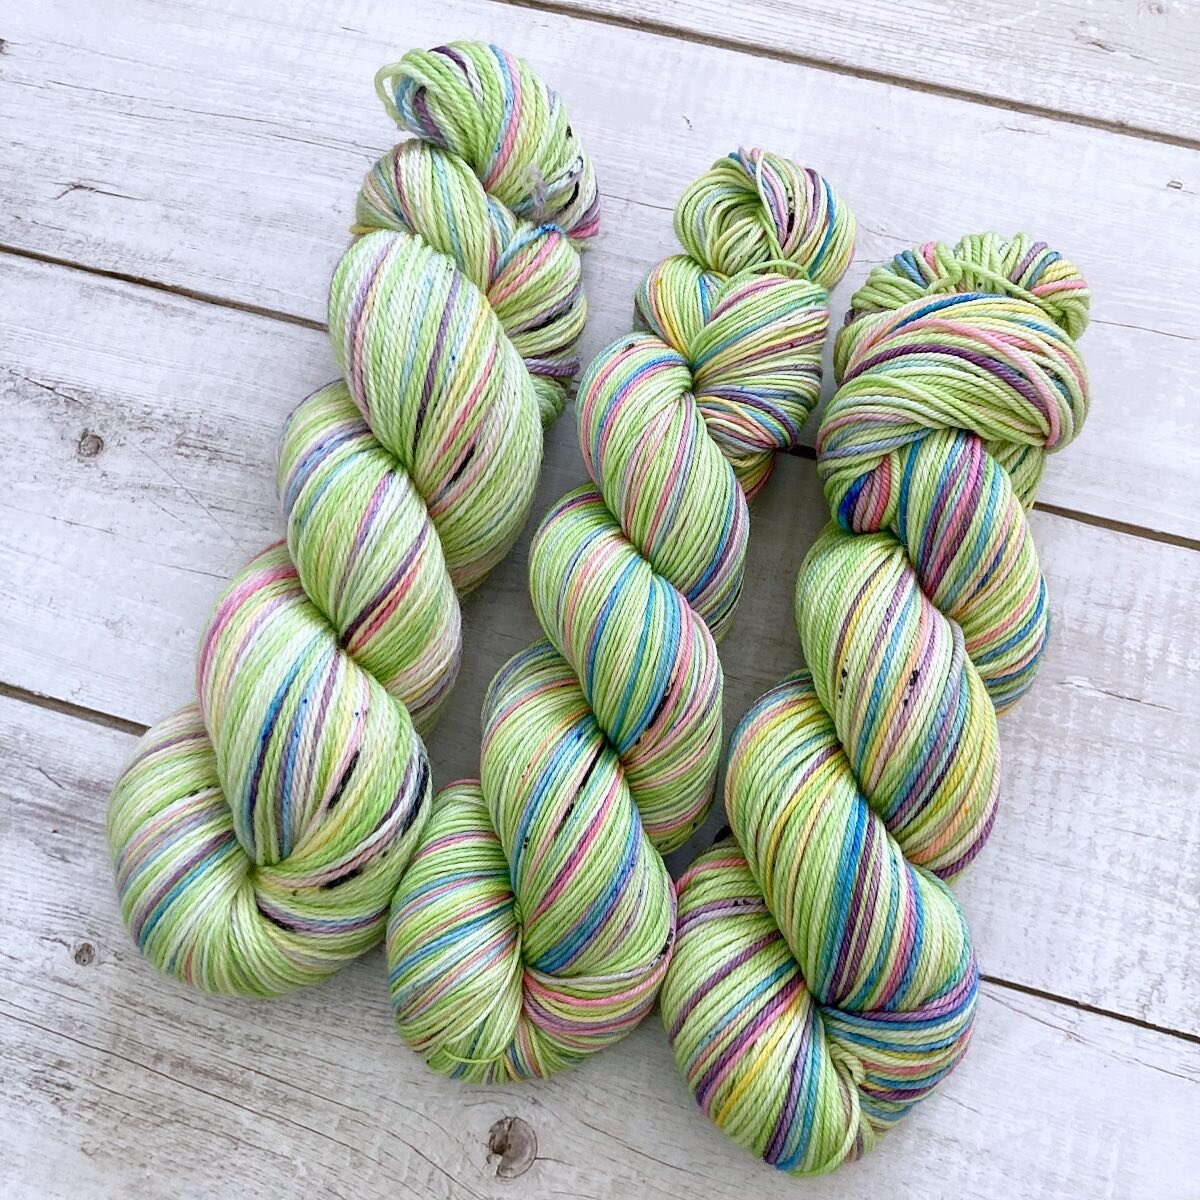 🌱🐥🌈Green Rainbow Peeps is such a happy yarn 🤗 

Especially since almost ALL the snow is gone, and the little bits of rain we are getting today means we might have a very green St. Patrick's Day ☘️ next week! 

On this Wednesday I am sad a package